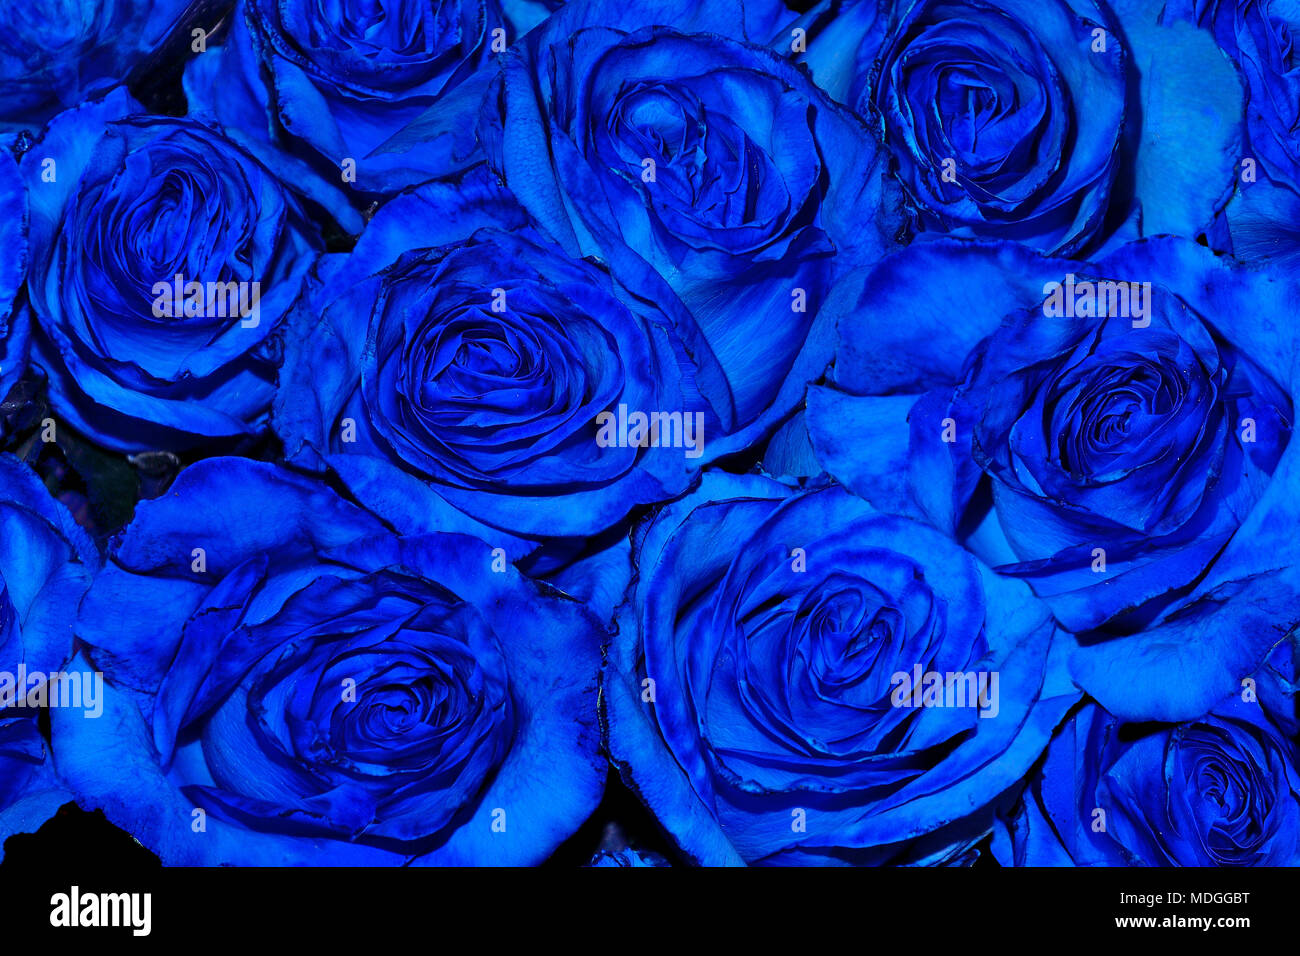 Beautiful floral festive background from blue blooming fresh roses close up as greeting card for any holiday or  event Stock Photo